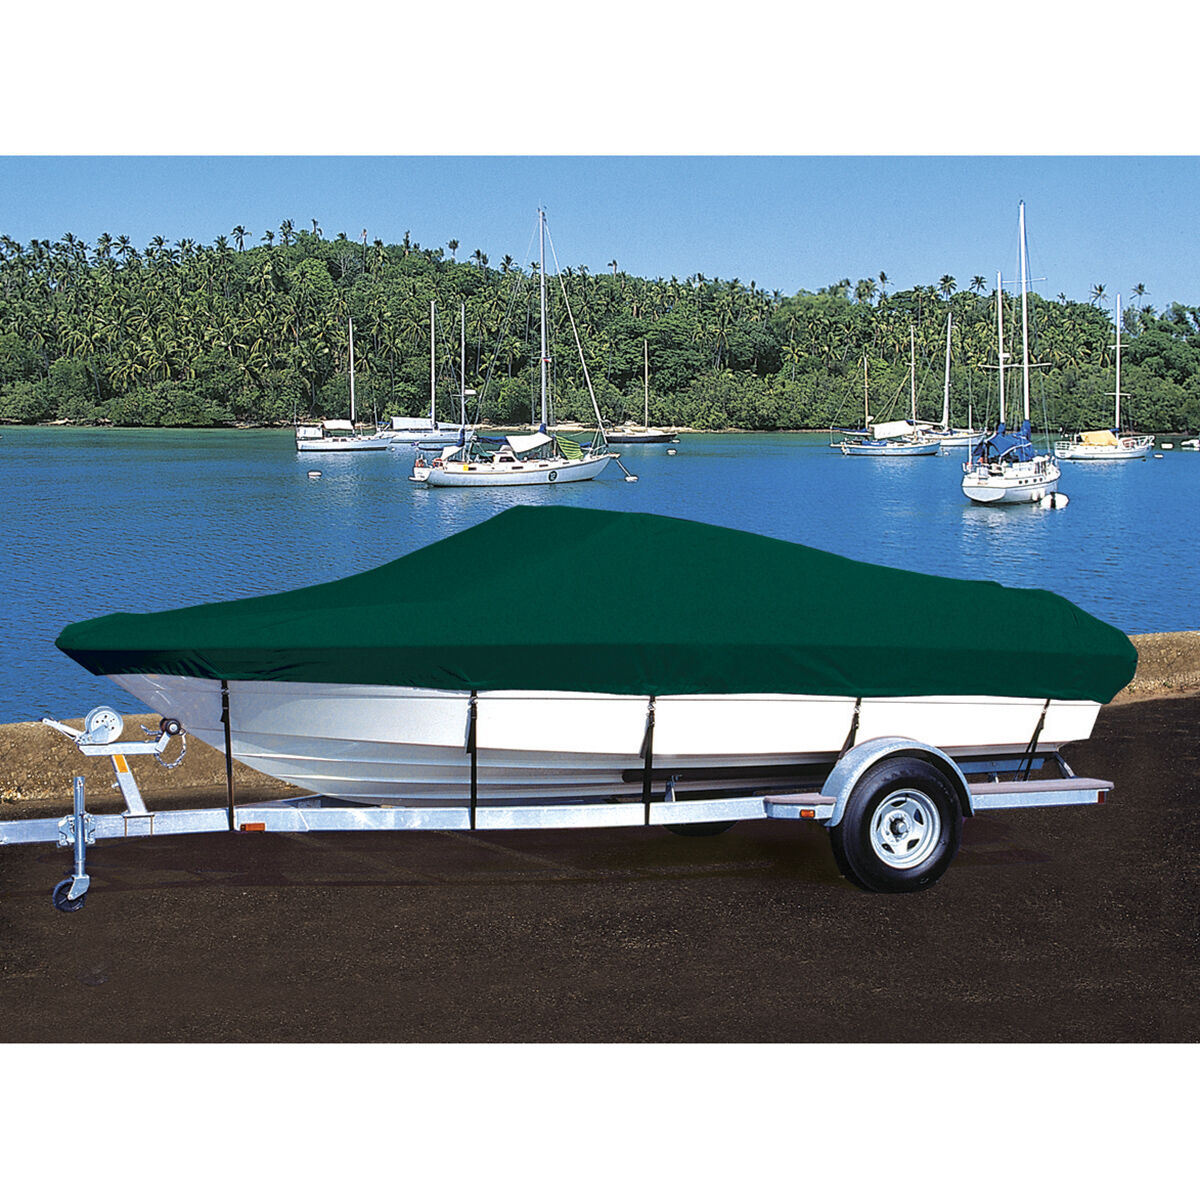 Taylor Made Trailerite Hot Shot Cover for 09-12 Lund 1625 Rebel XL Sport PTM O/B Boat Cover in Green Polyester